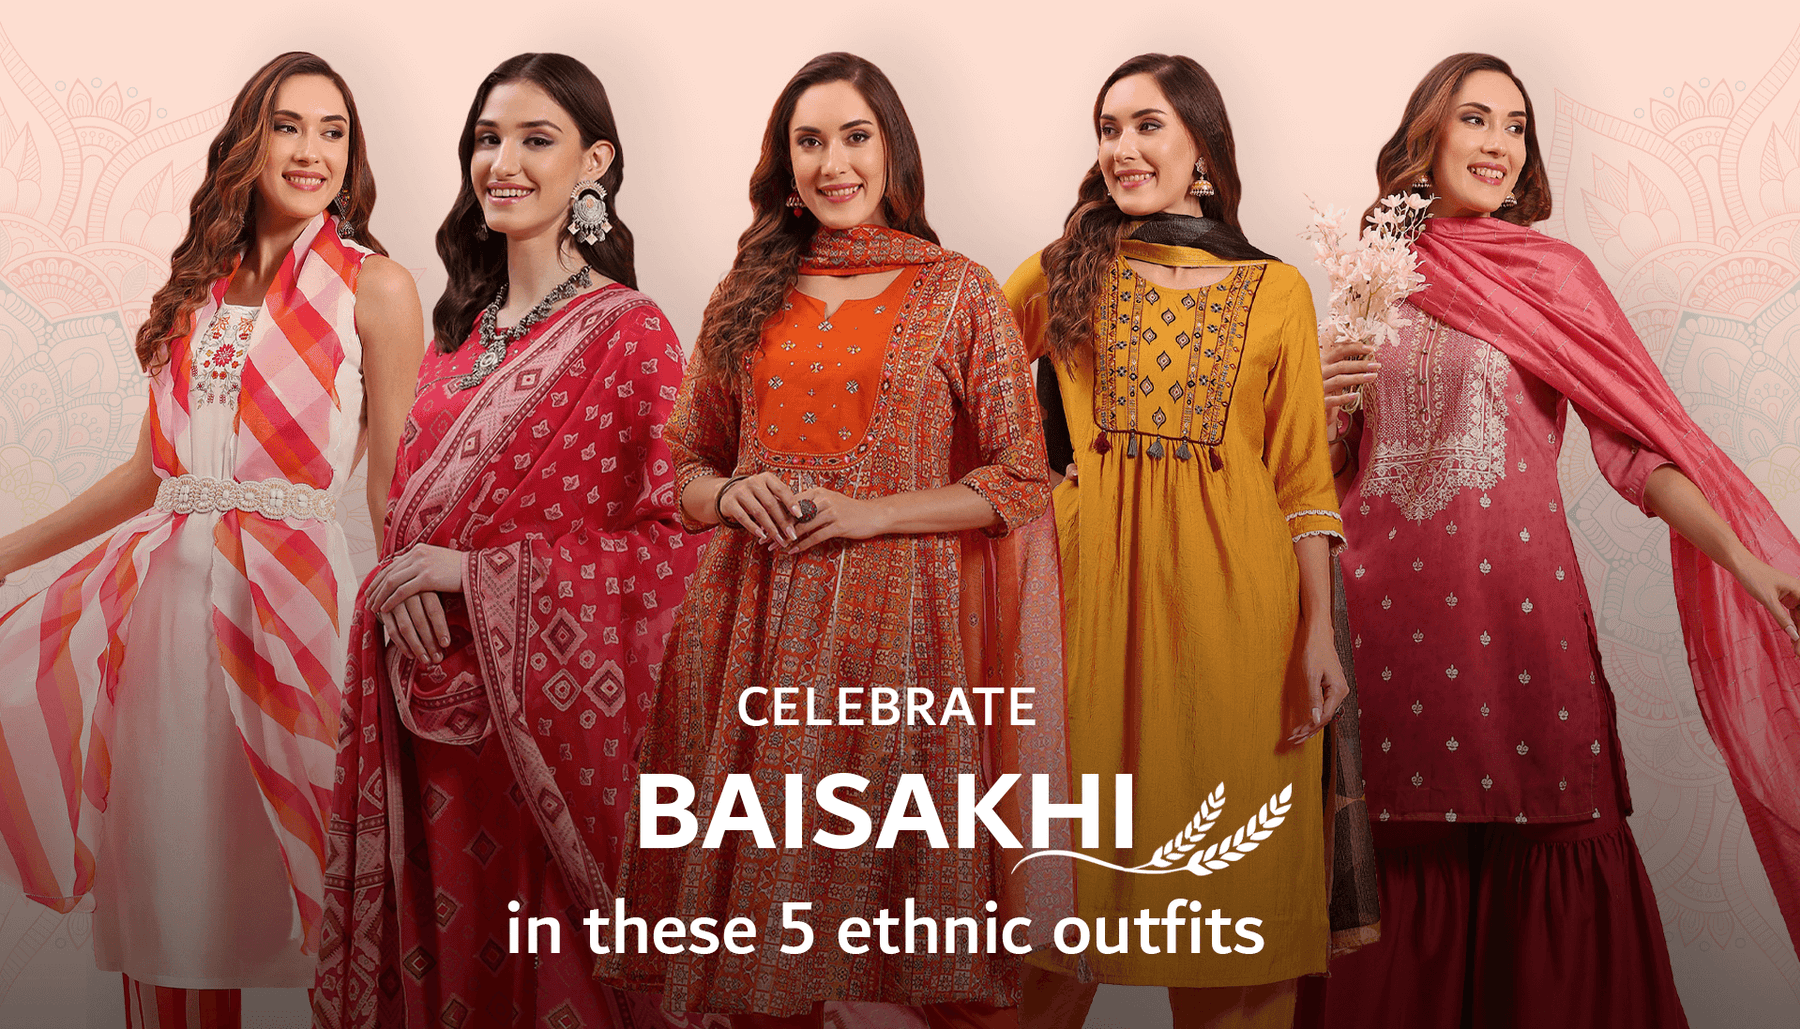 Celebrate Baisakhi in these 5 Ethnic Outfits